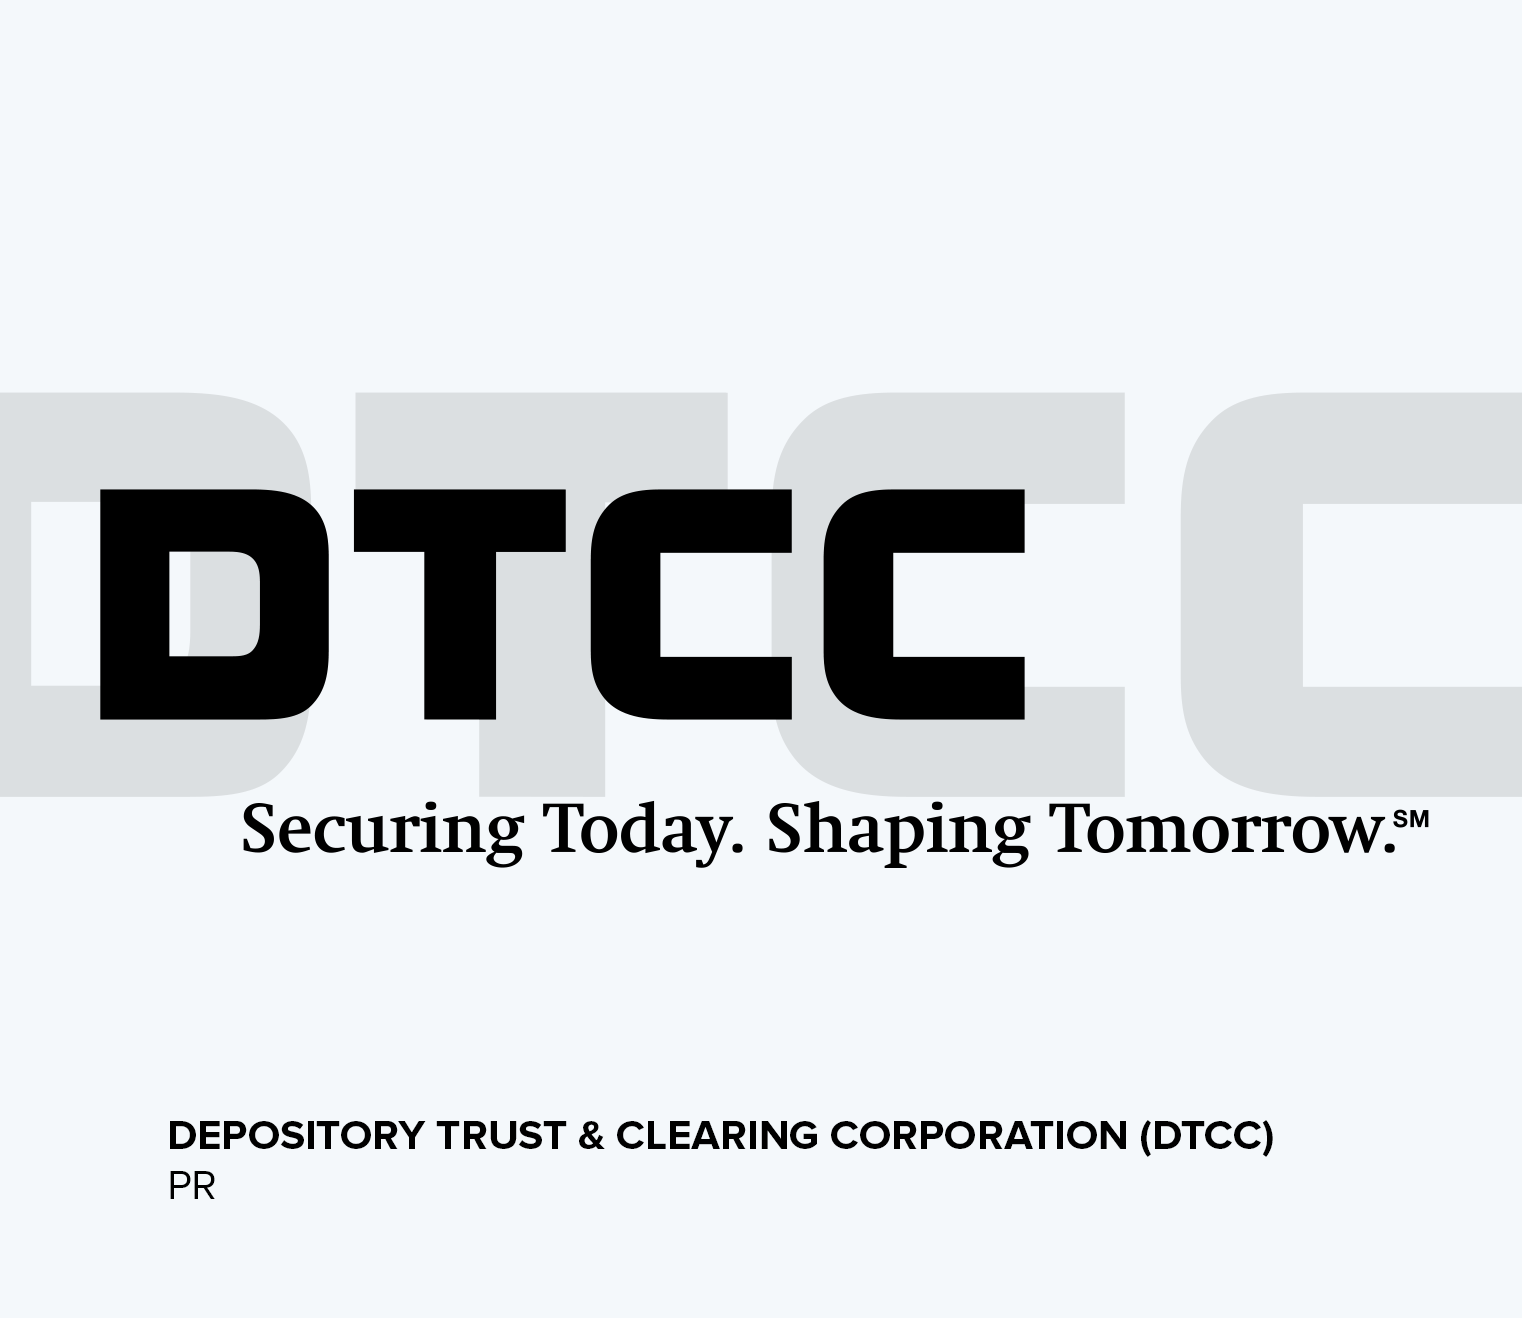 Logo for DTCC in black text, overlaid on a larger logo in light grey on a white background. Also has the text “ Securing Today. Shaping Tomorrow.“